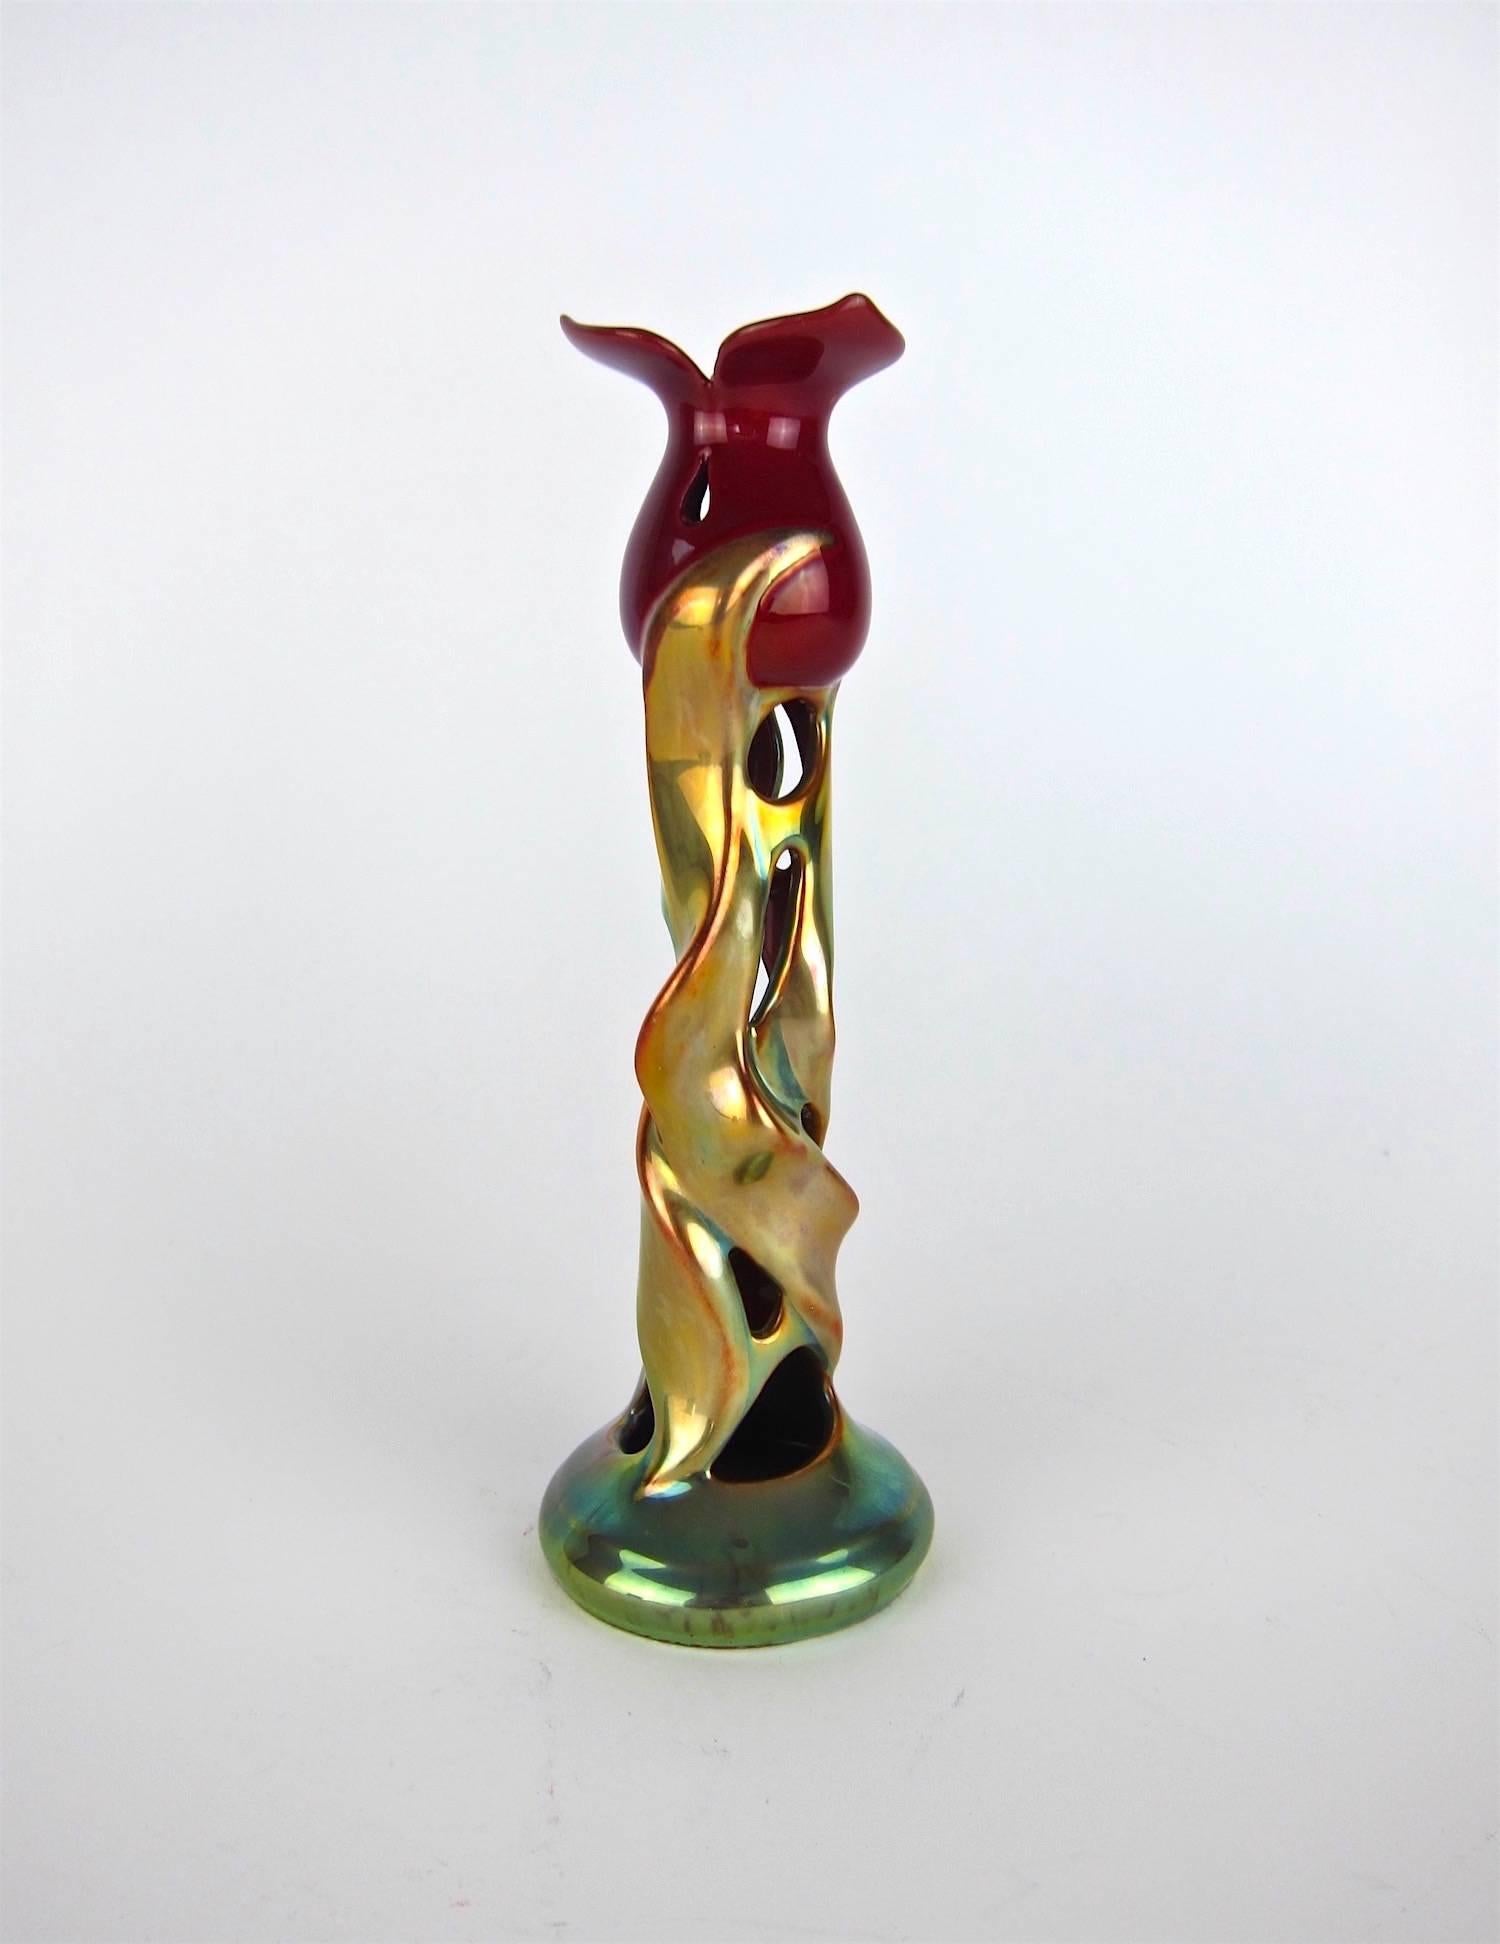 A stunning Zsolnay Pecs porcelain tulip candlestick with a metallic luster gold and green glaze, designed in the turn of the 20th century high Art Nouveau / Jugendstil style. The candlestick is illustrated on page 185 of Federico Santi and John